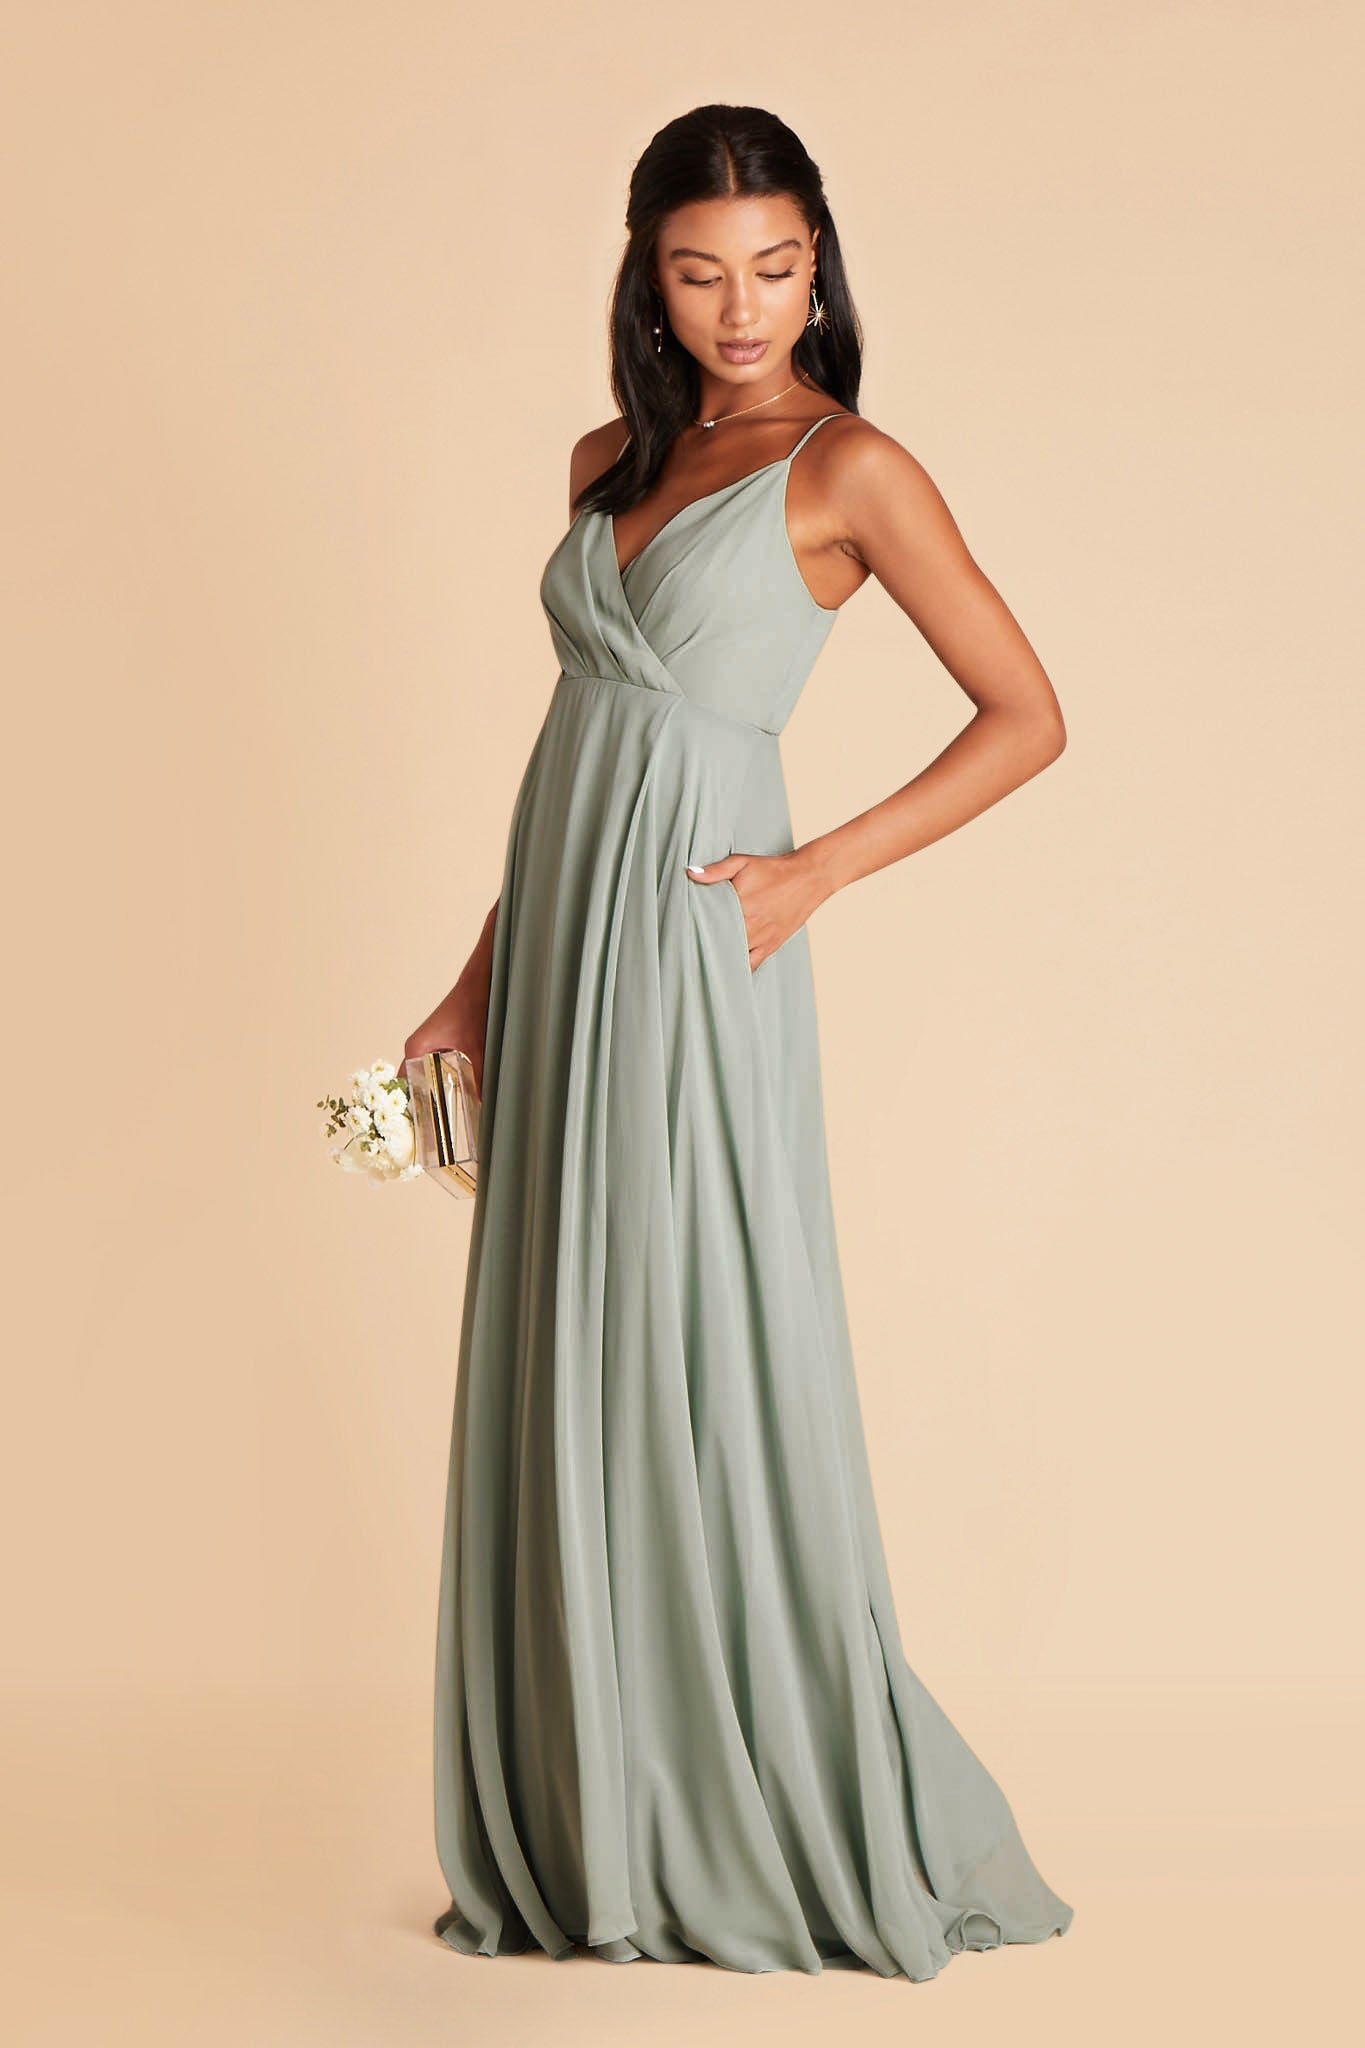 Side view of the Kaia Dress in sage chiffon shows the model with their hand in the side seam pocket.